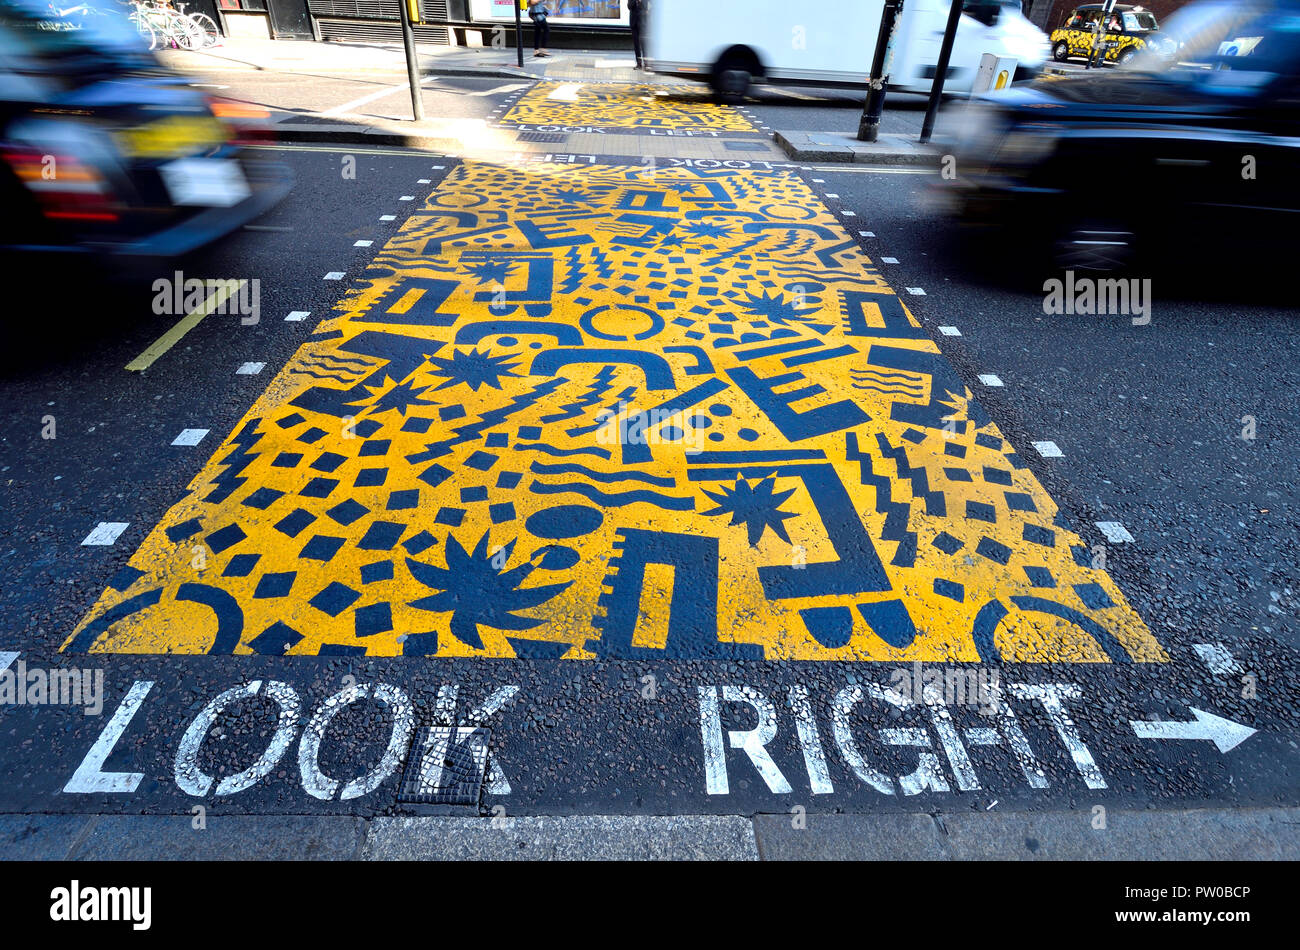 'City Jam' (Eley Kishimoto 2018) pedestrian cossing by the Barbican, part of the Culture Mile 'Colourful Crossings' art project, London, UK. Stock Photo